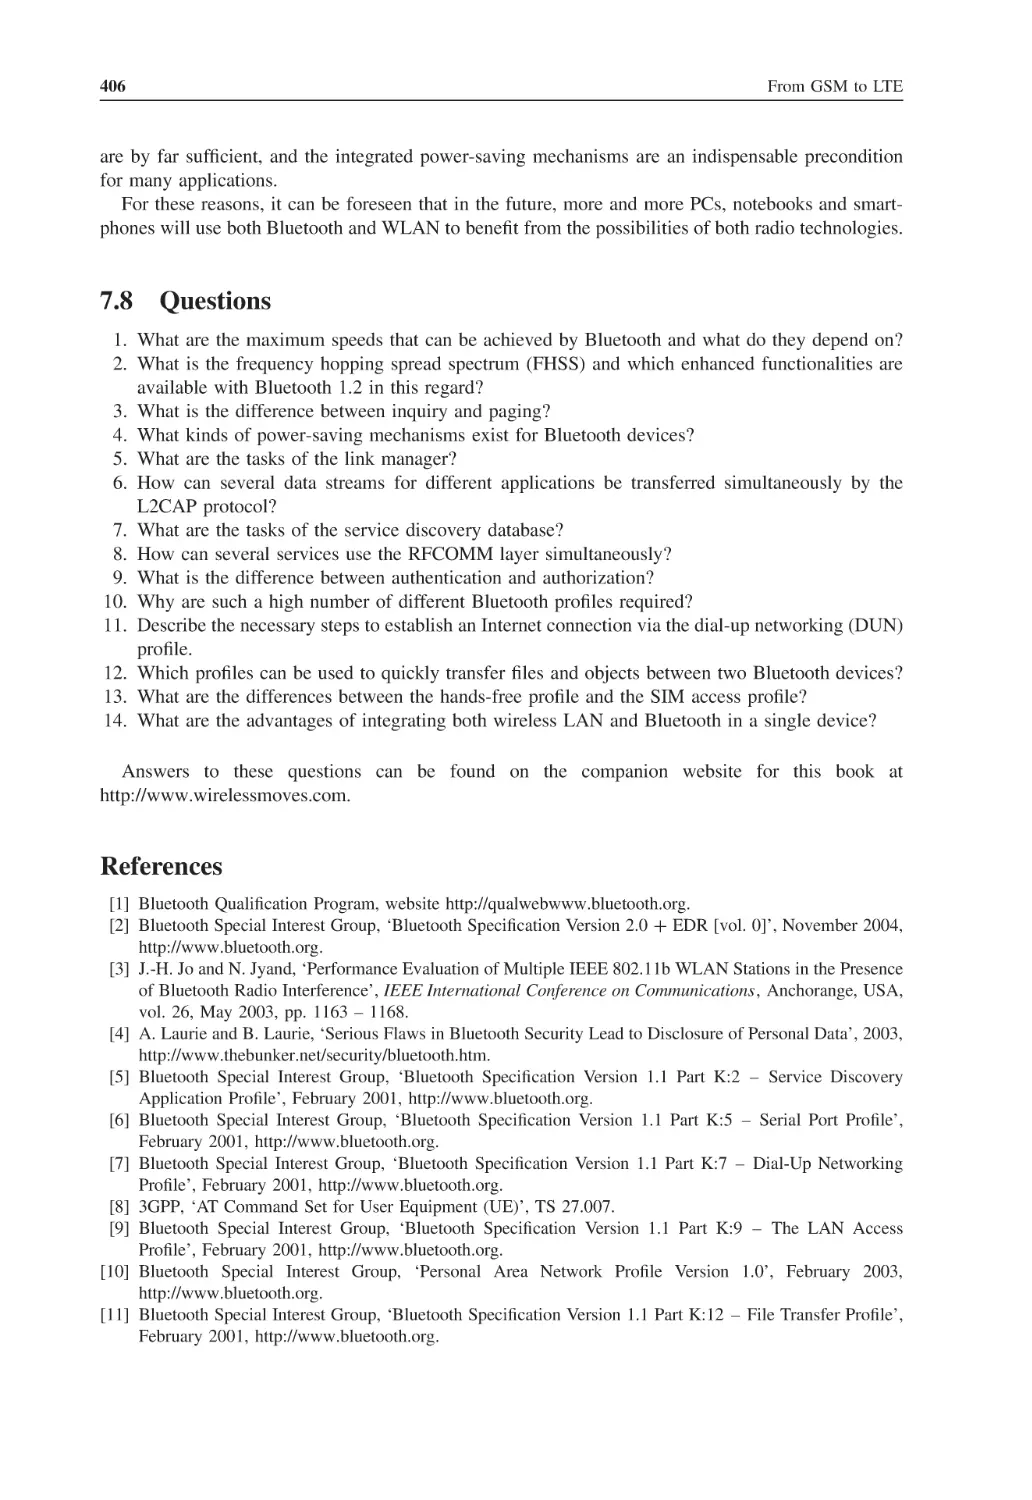 7.8 Questions
References